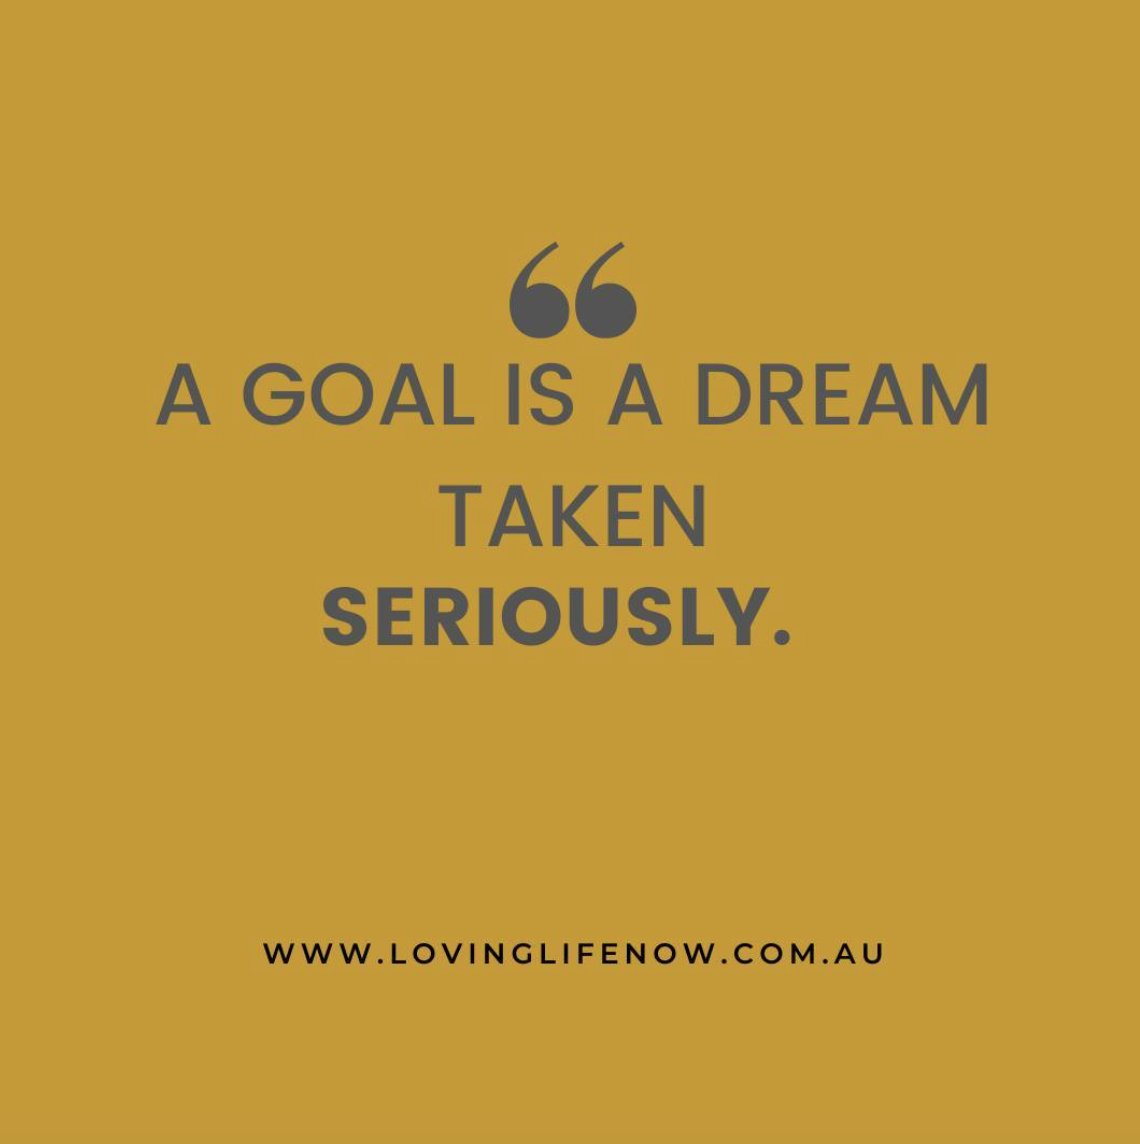 A goal is a dream taken seriously
-
-
#LivingLovingLife
#OnlineIncomeOpportunity #WorkFromAnywhere #OnlineBusinessSolution
#SimonAndLeeAnne #LifestyleLoveAndBeyond
#LaptopLifestyle #PortableOnlineBusiness
#SimonHaggard #LeeAnneHaggard #LovingLifeNow